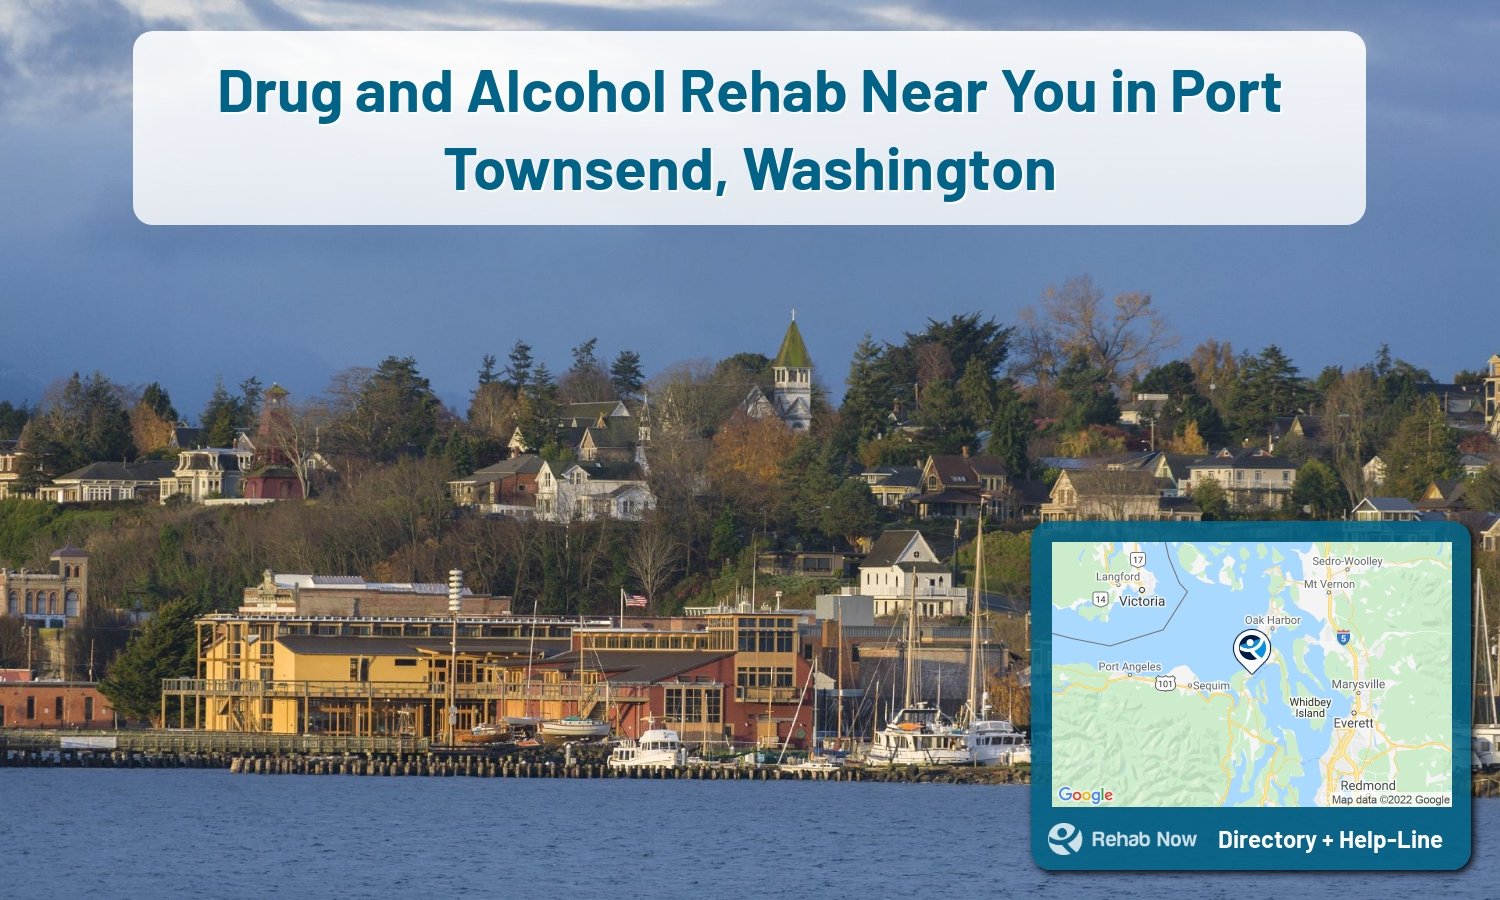 Our experts can help you find treatment now in Port Townsend, Washington. We list drug rehab and alcohol centers in Washington.